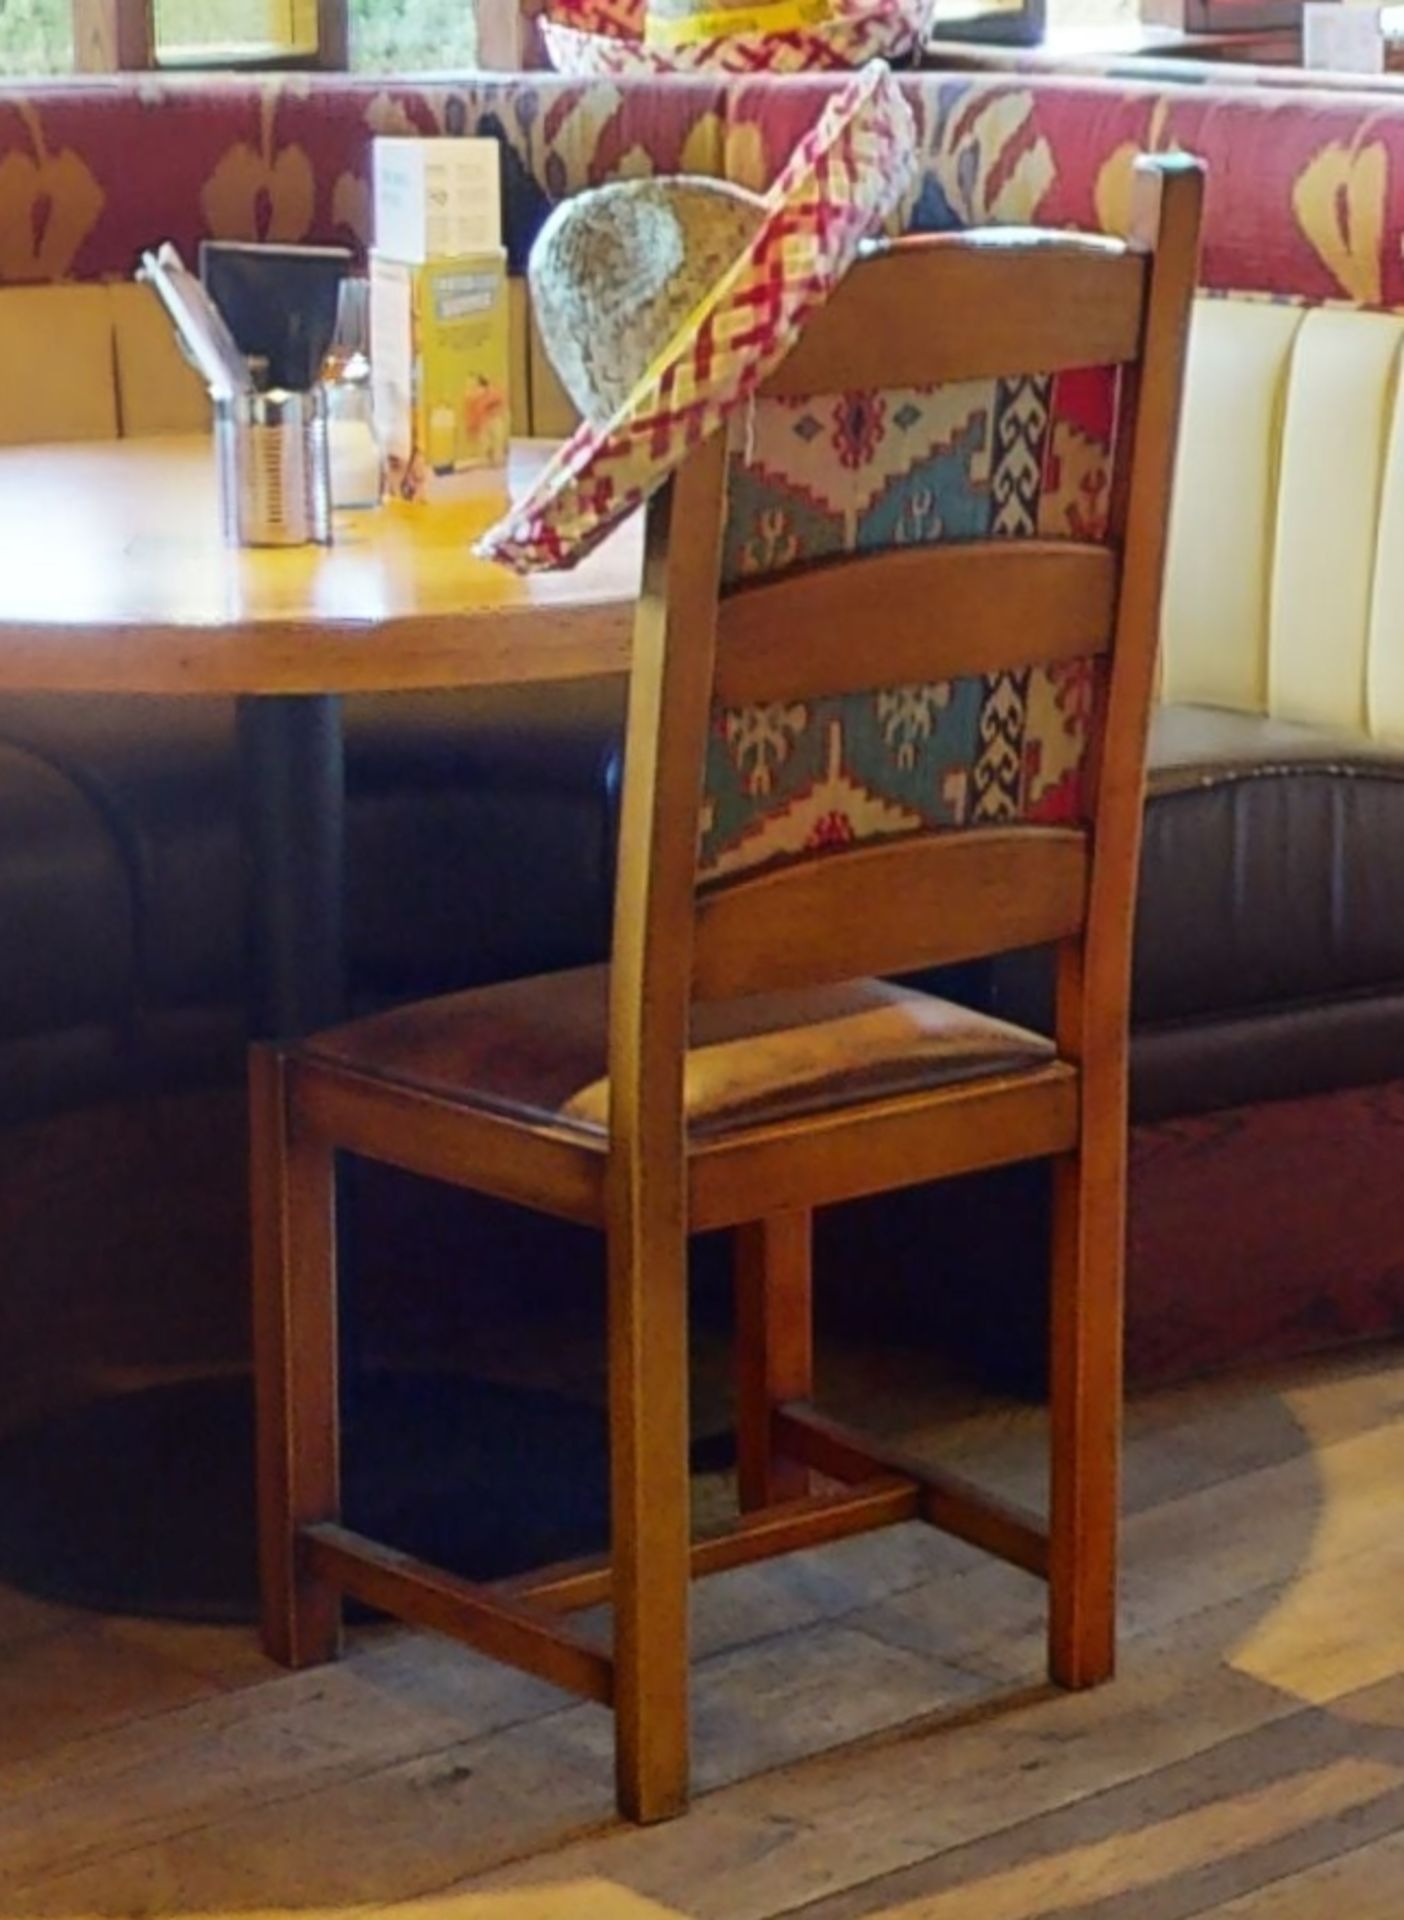 15 x Restaurant High Back Dining Chairs With Faux Leather Brown Seat Pads and Mexican Inspired - Image 6 of 11